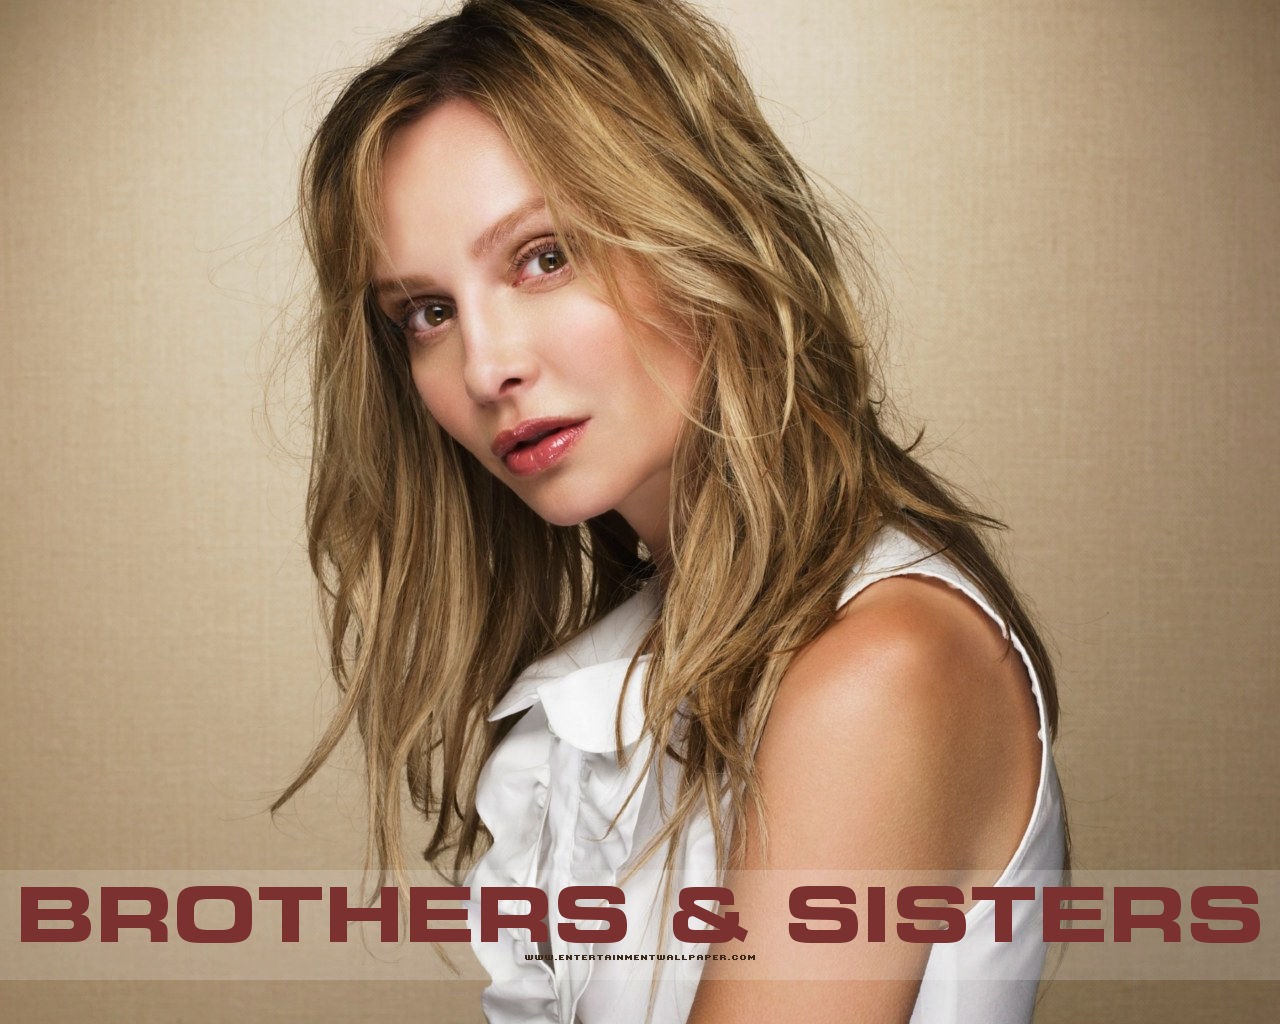 Brothers & Sisters 兄弟姐妹 #24 - 1280x1024